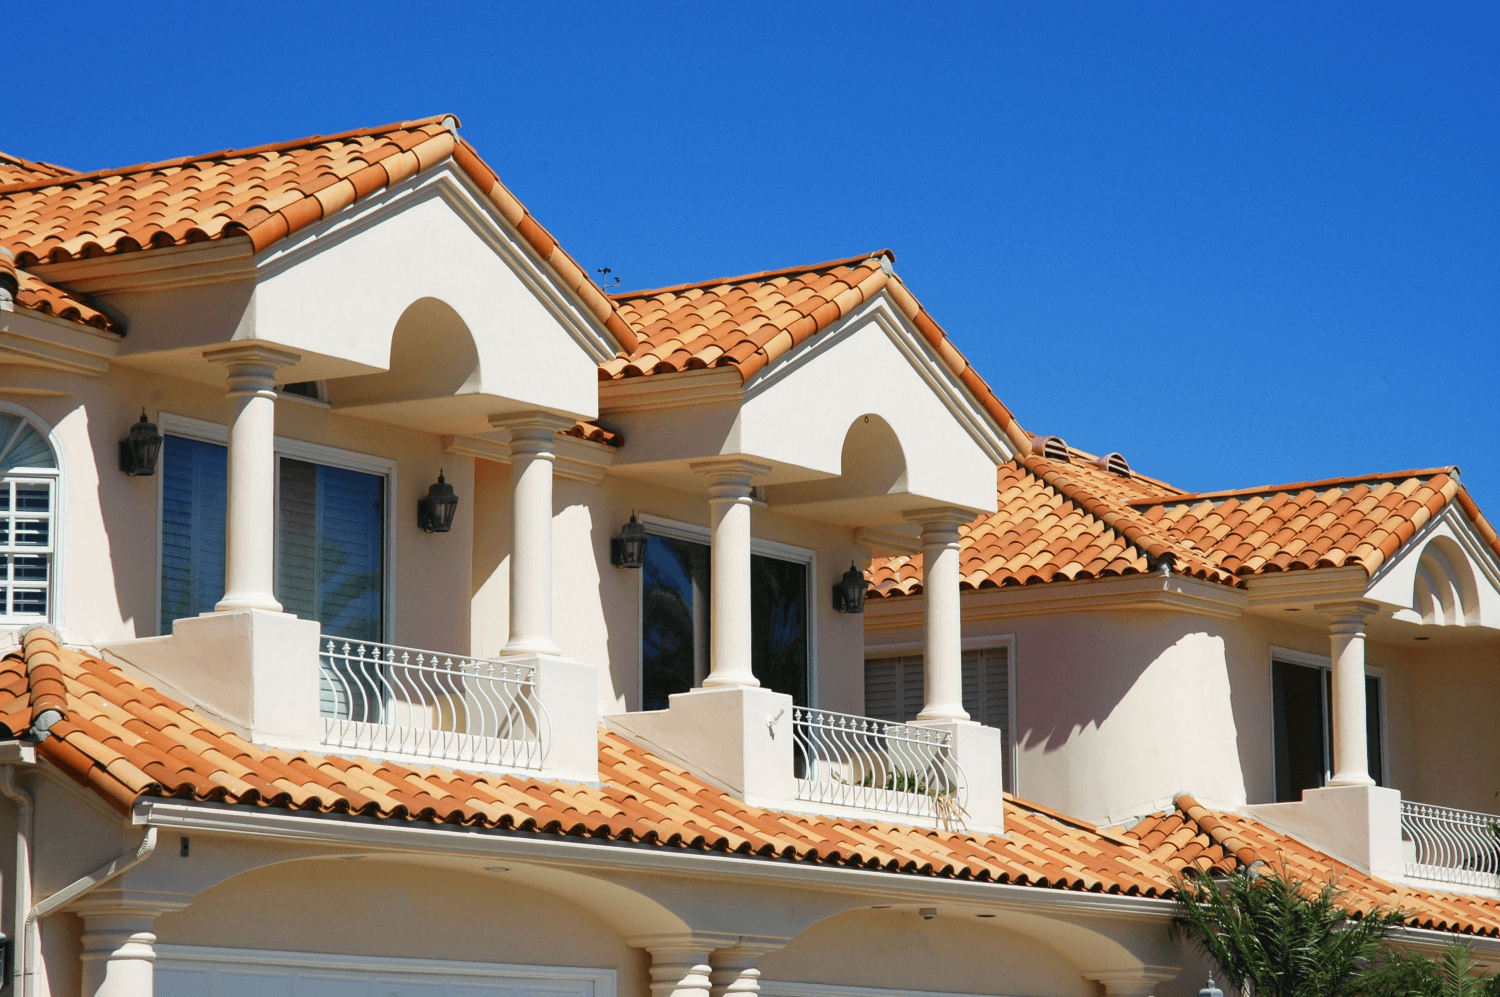 Roof Types Best Roofing Material